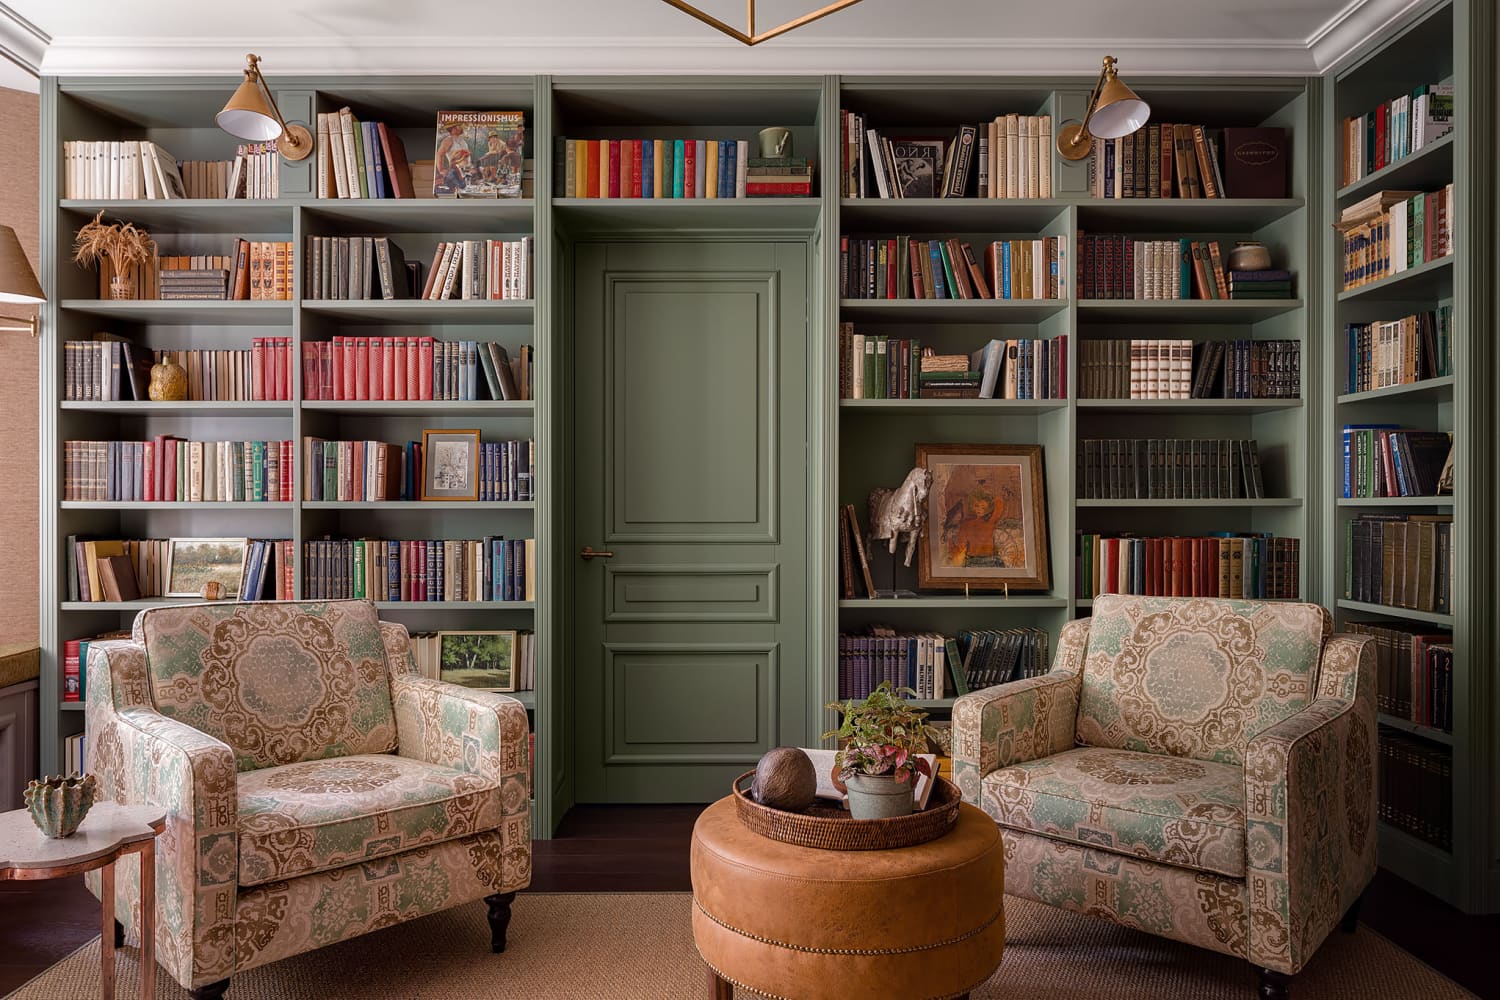 8 Home Library Ideas to Make Your Book Collection a Focal Point | Apartment Therapy